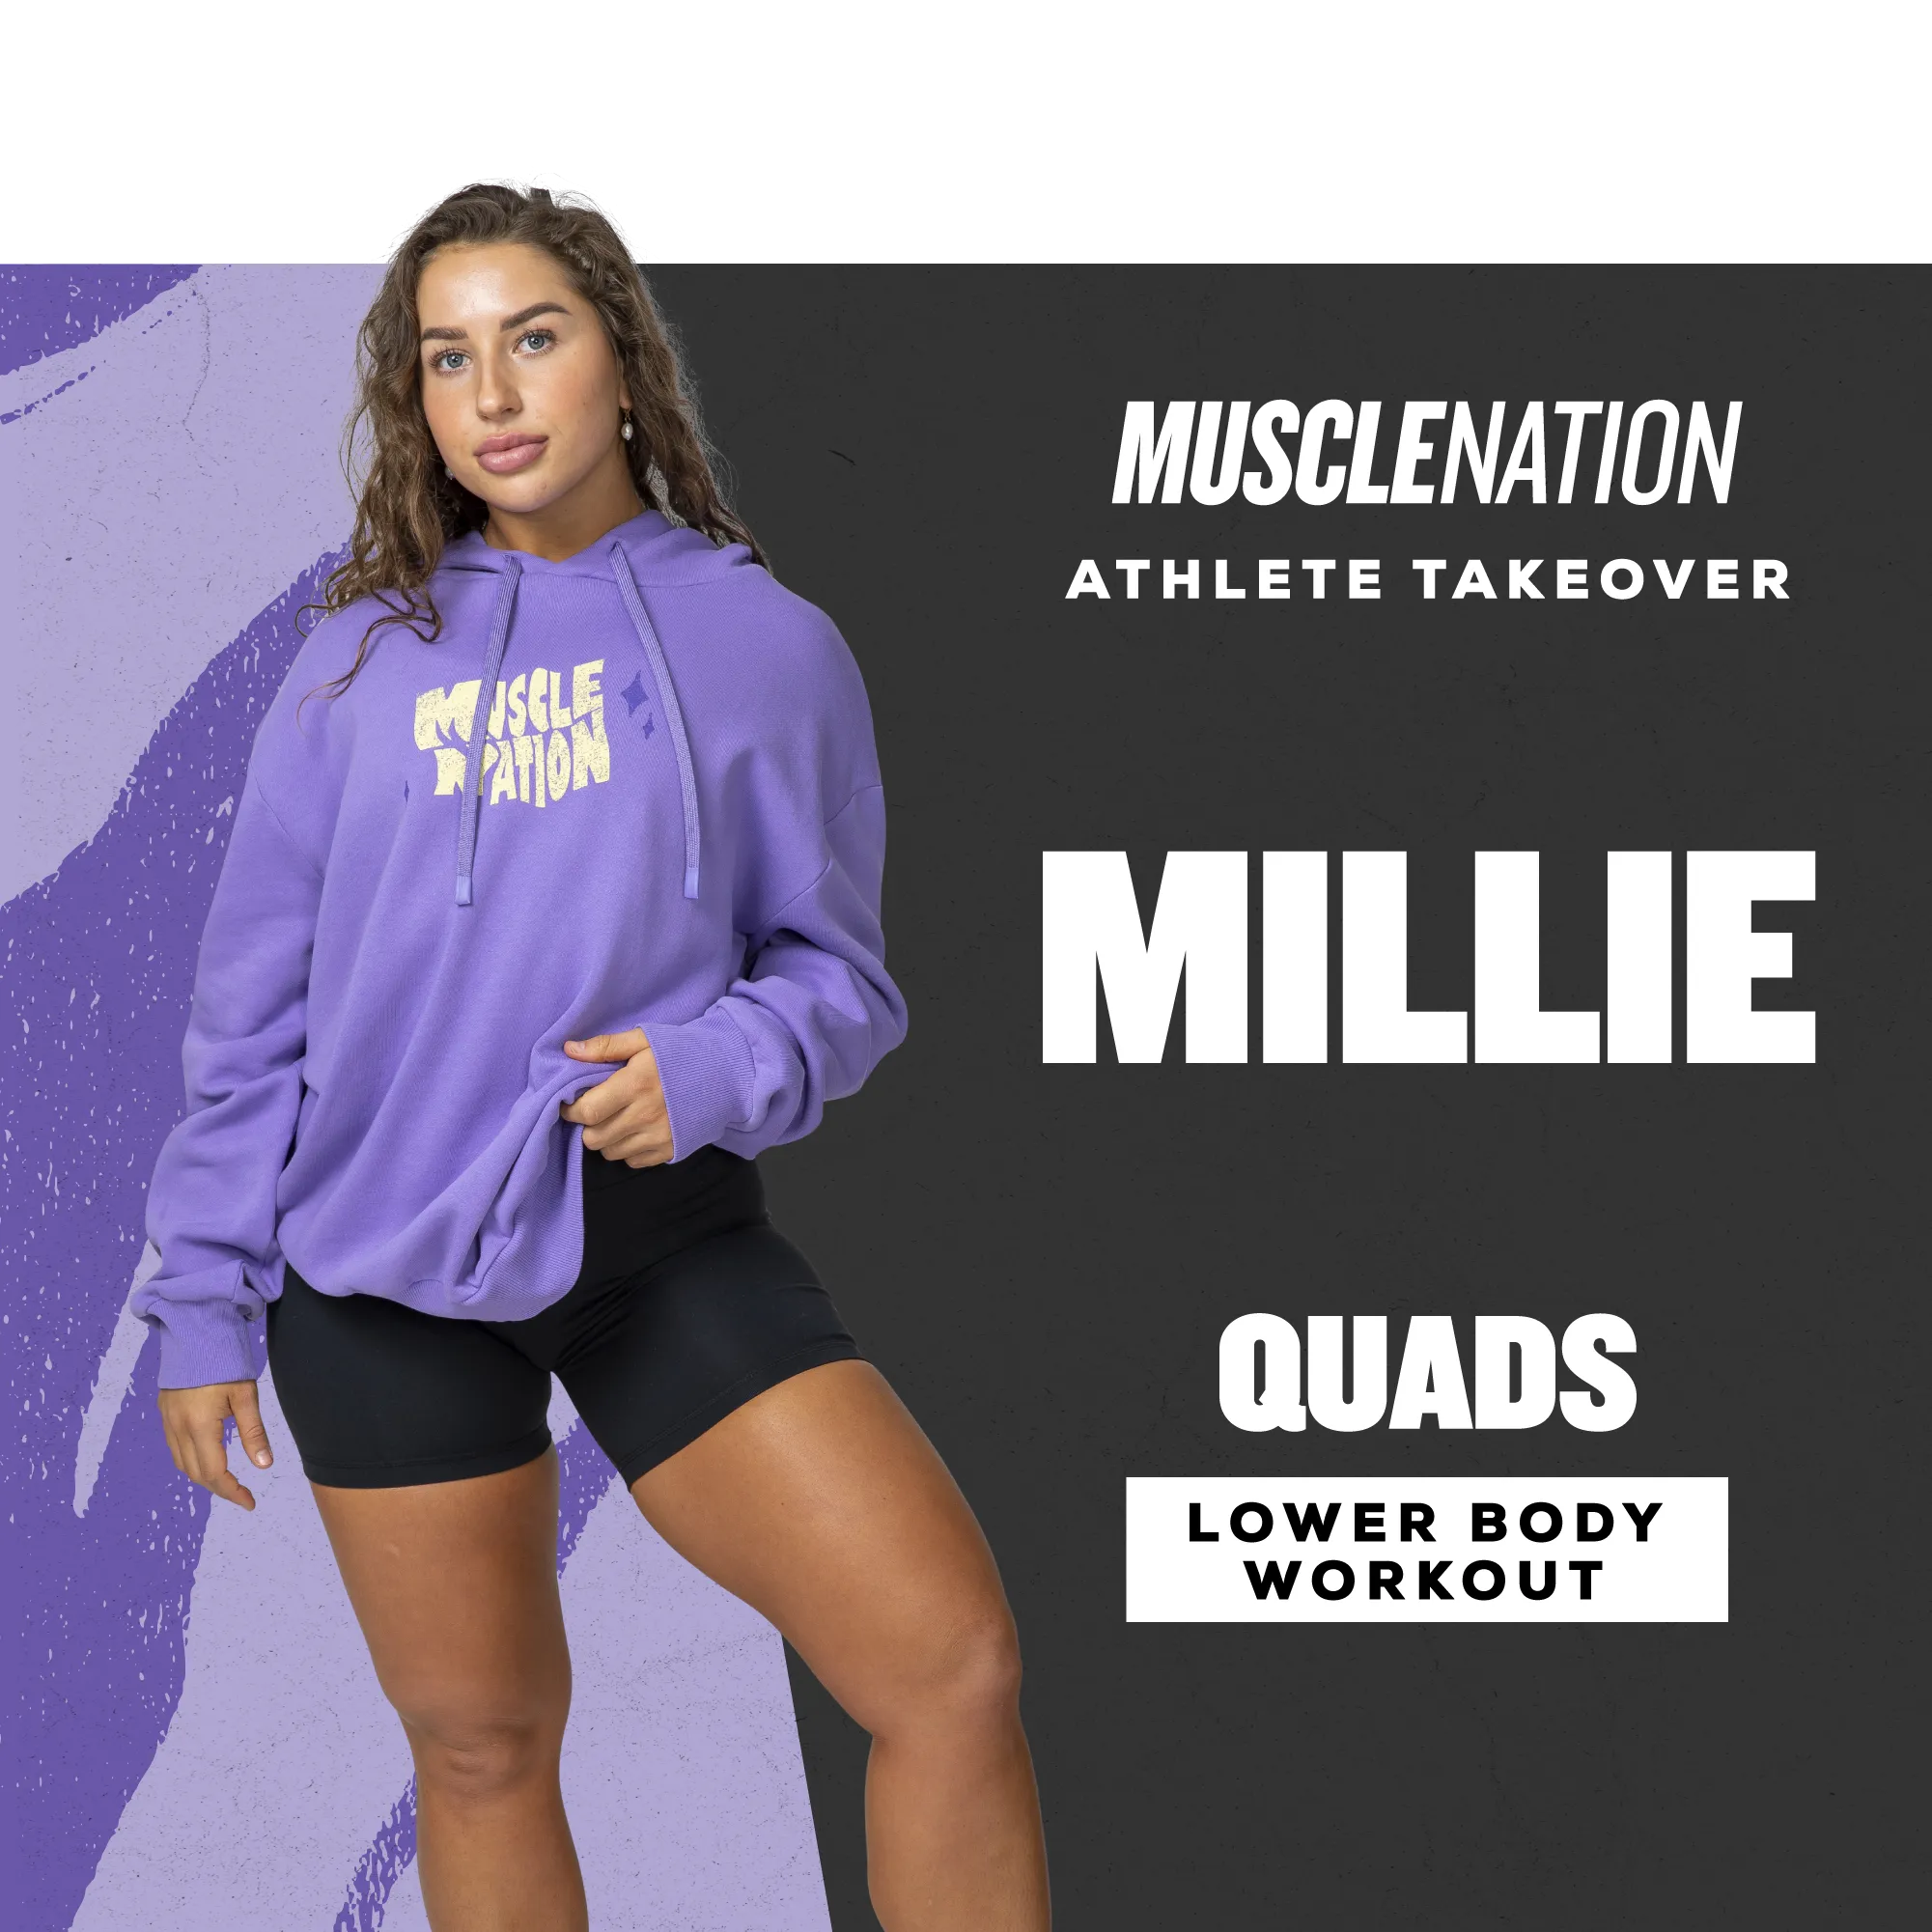 Pin on millie workout notes